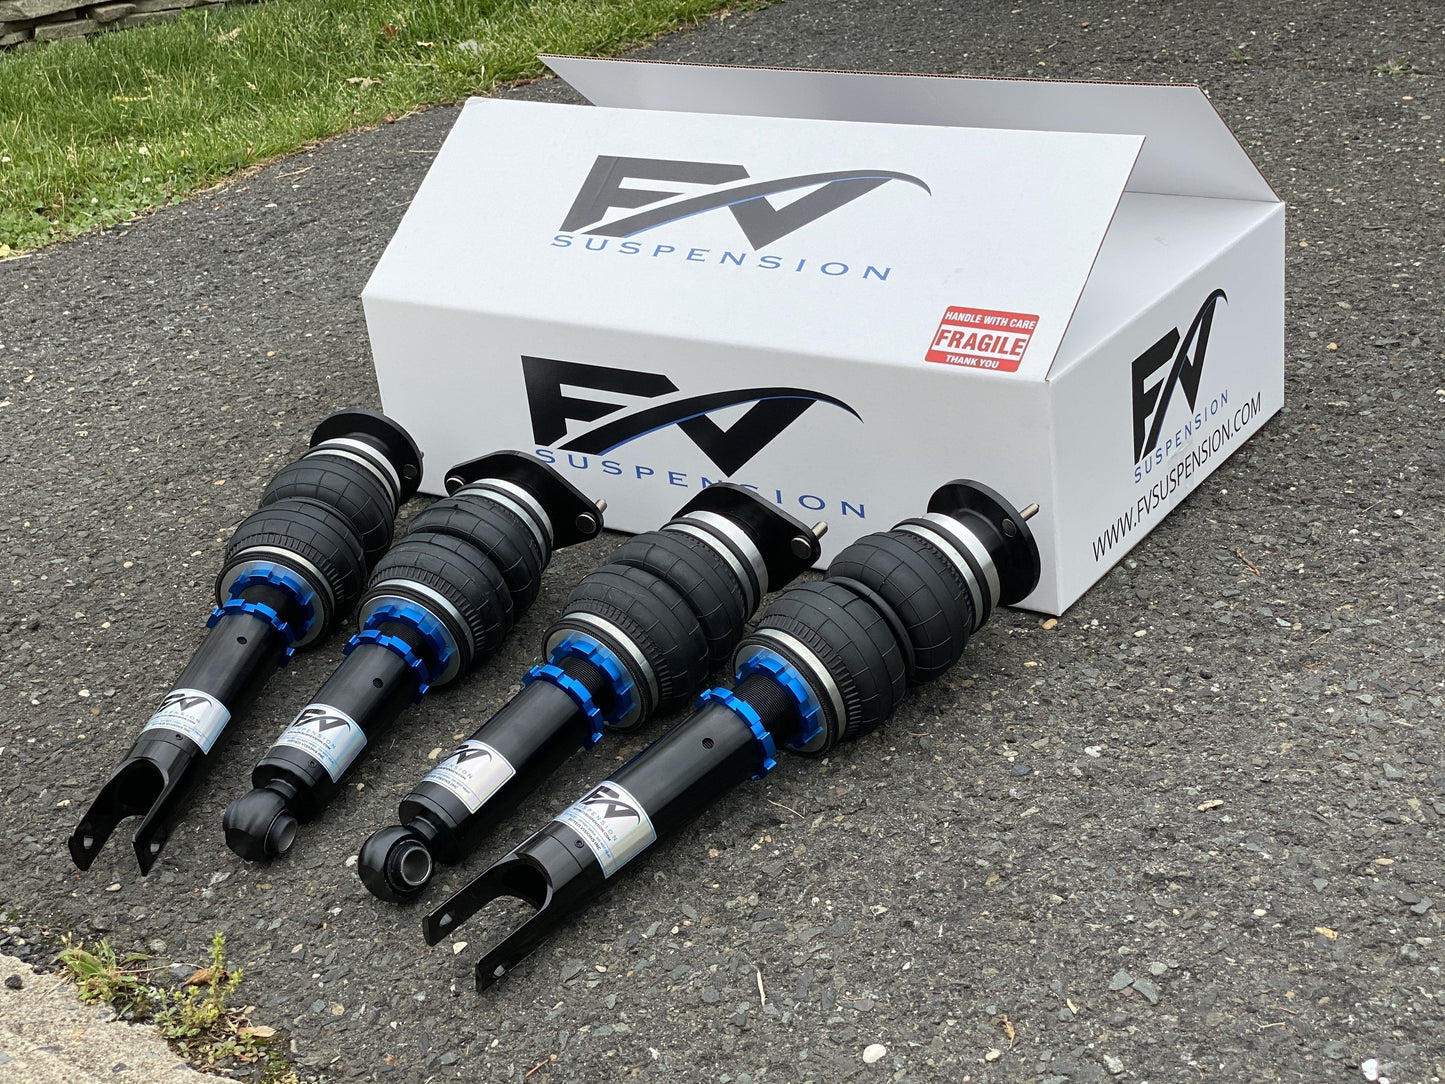 FV Suspension 3H Tier 3 Complete Air Ride kit for 95-03 BMW 5 Series Wagon - FVALtier3kit97